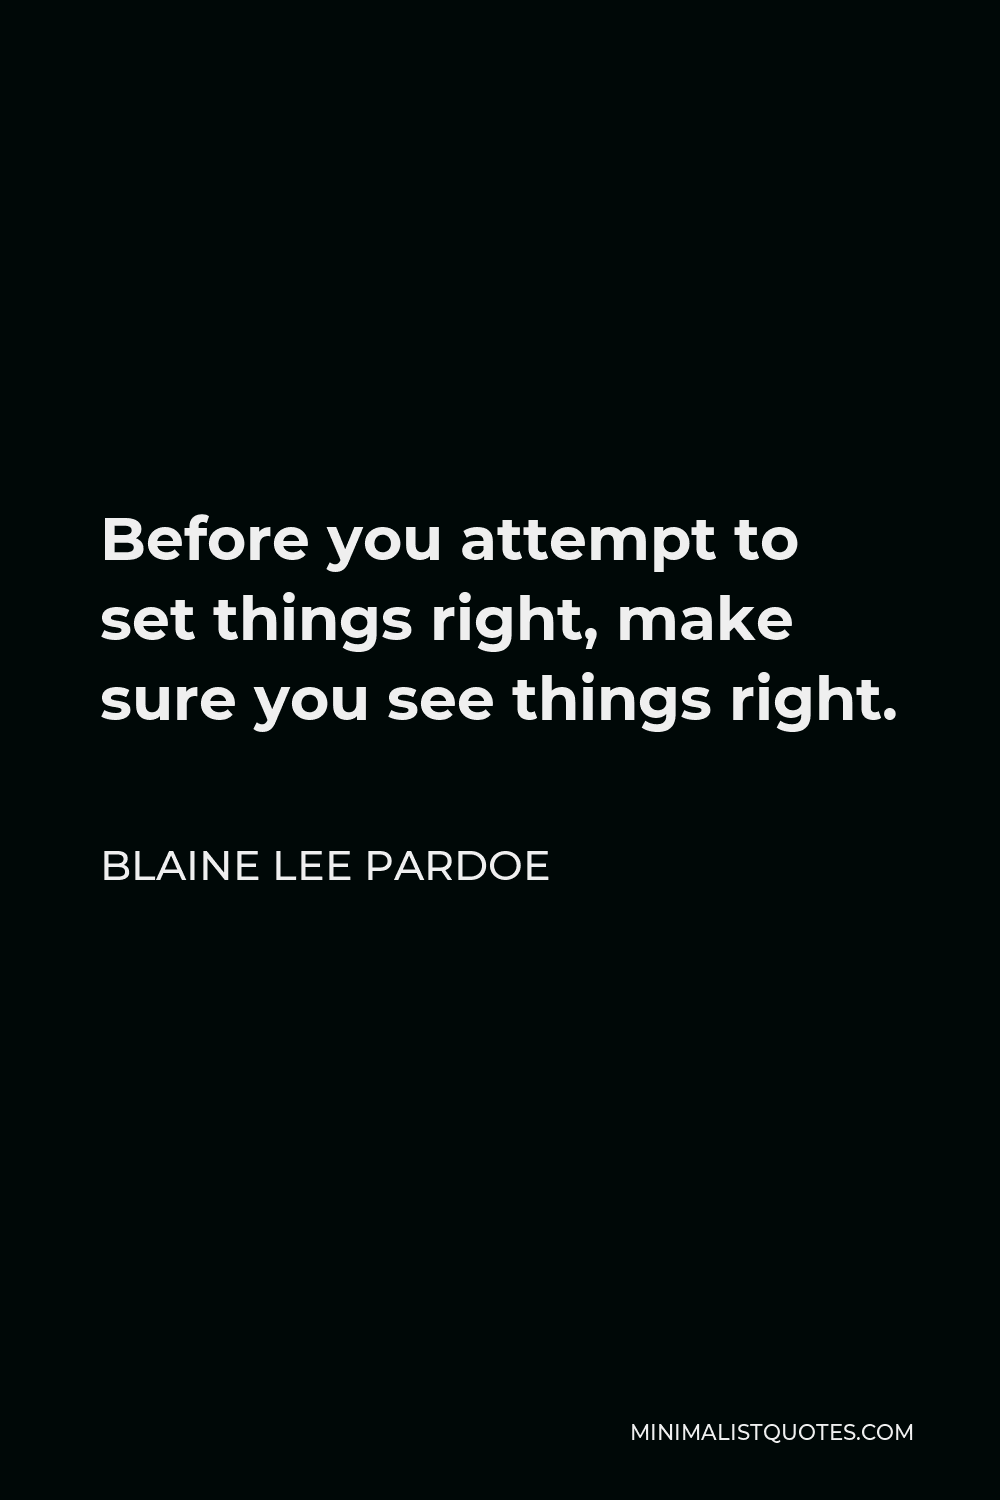 Blaine Lee Pardoe Quote - Before you attempt to set things right, make sure you see things right.